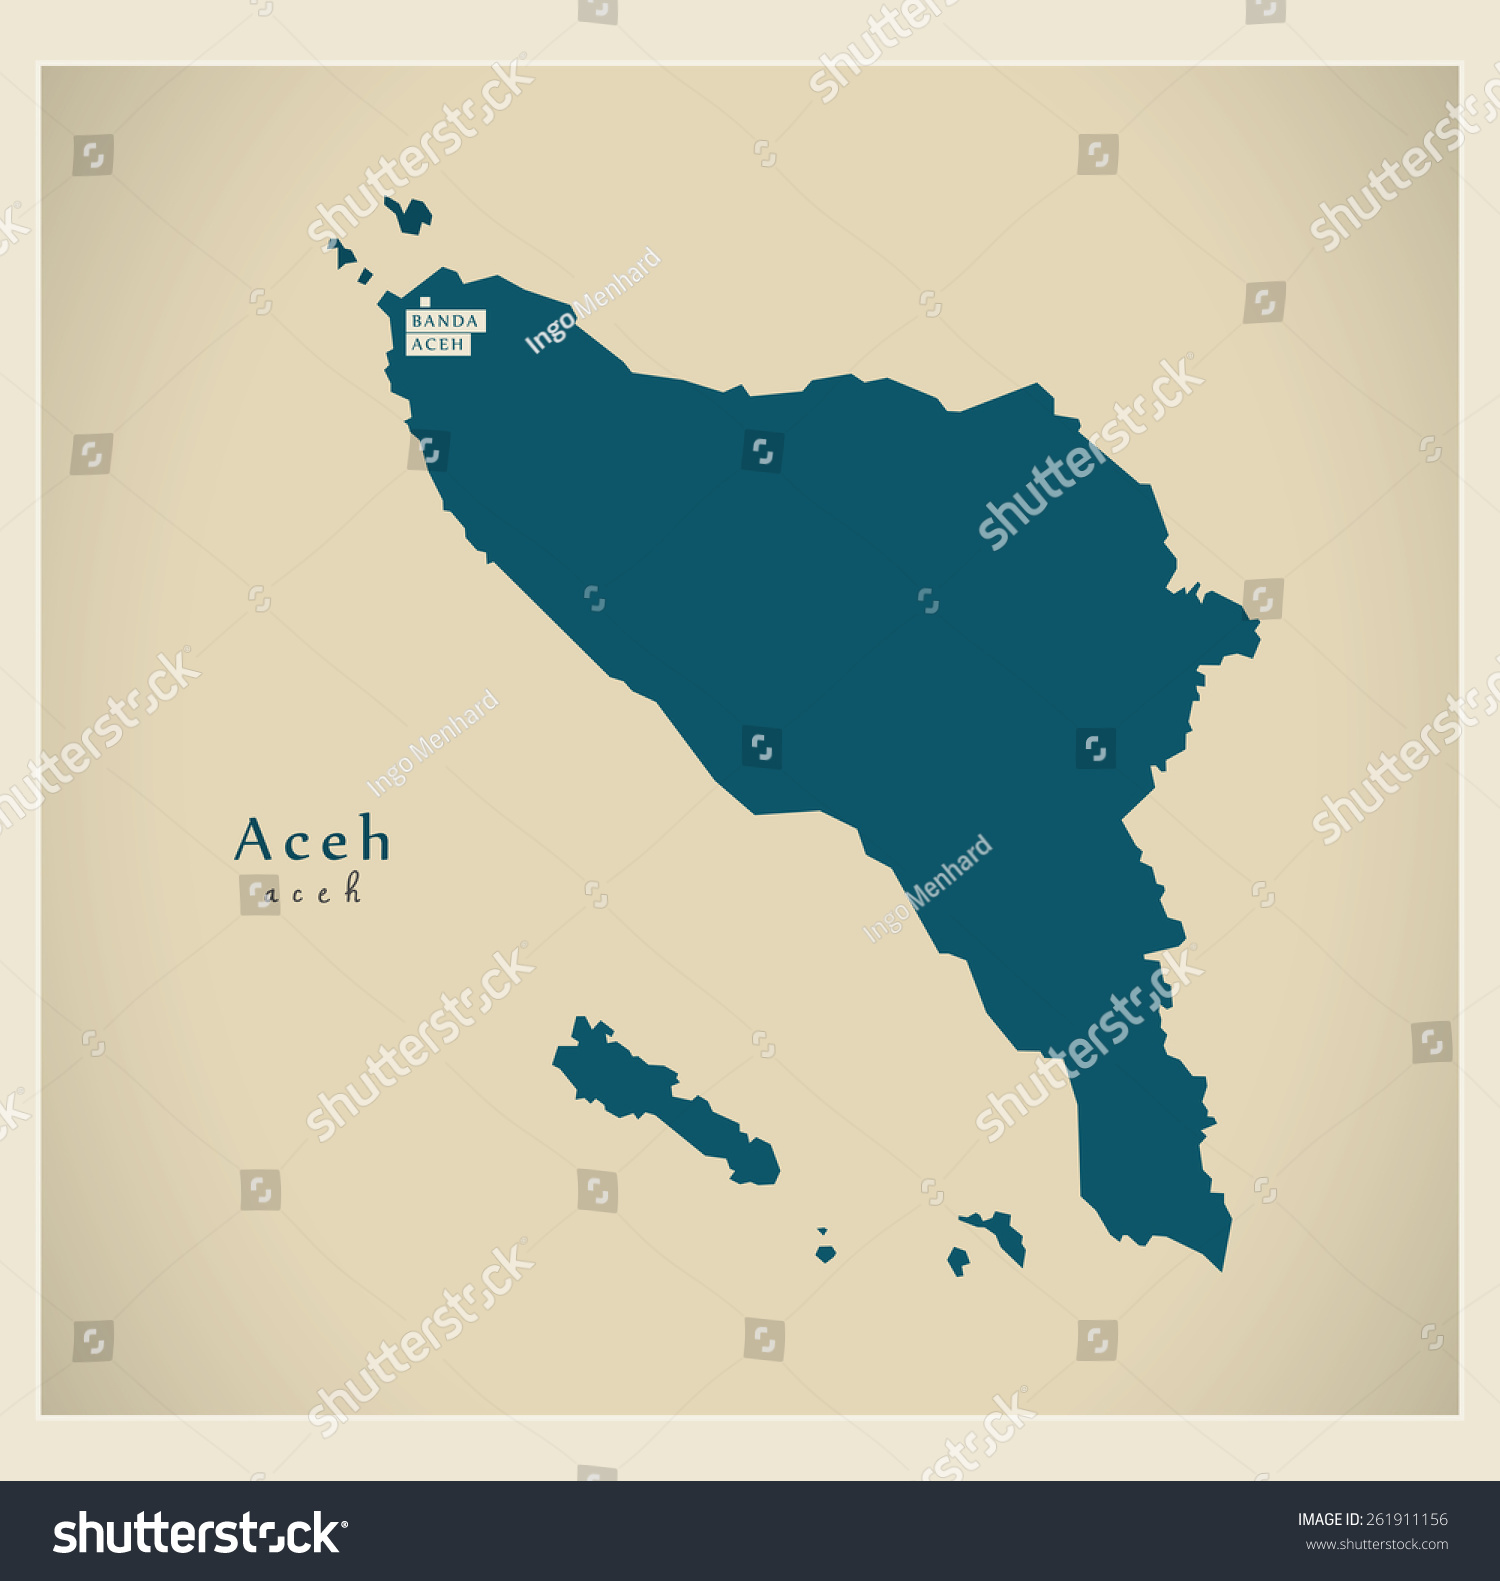 SVG of Modern Map - Aceh ID svg